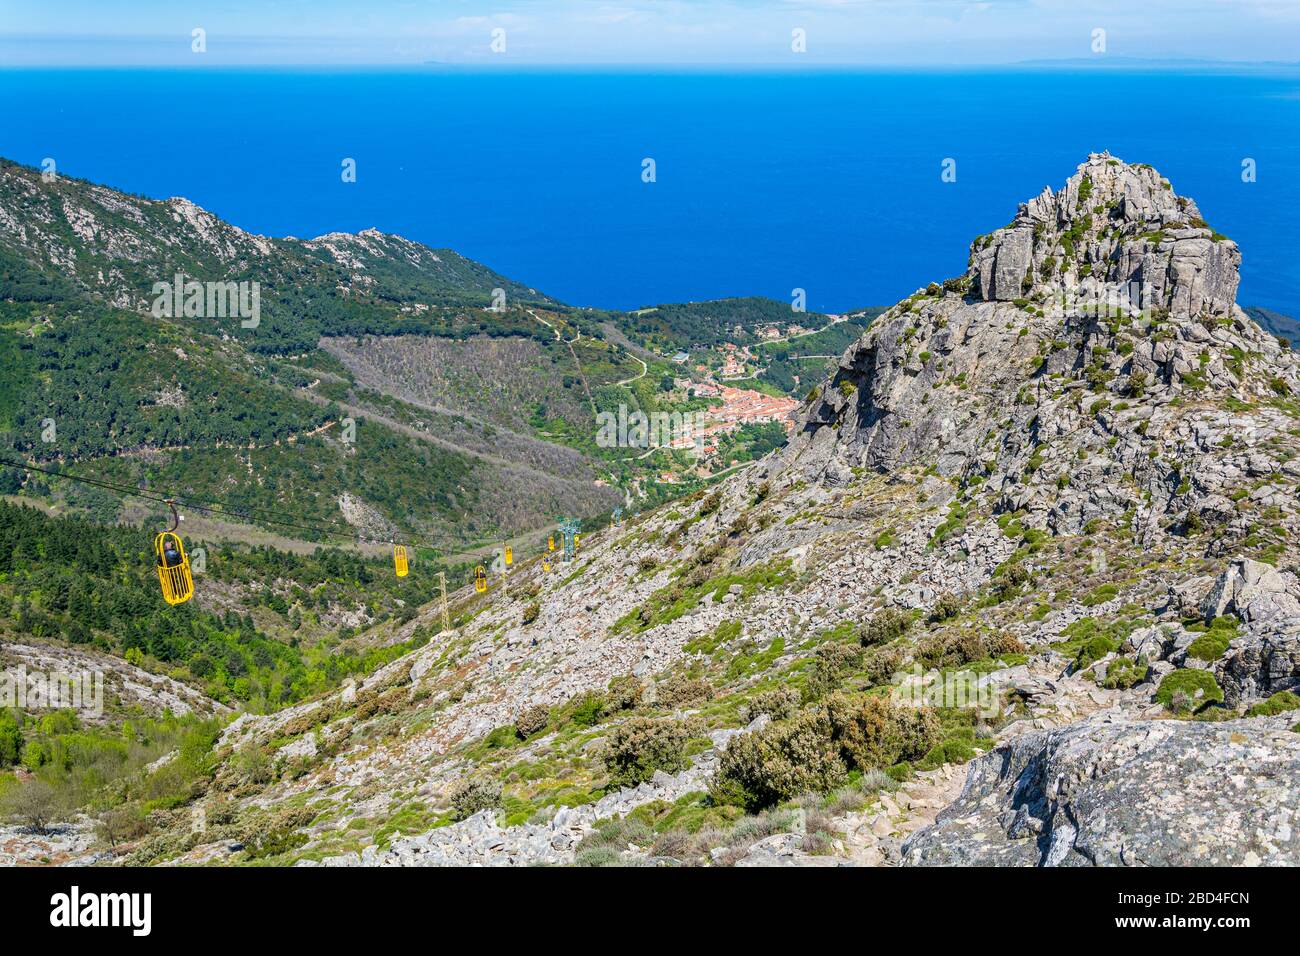 Scenic view from the top of Capanne Mountain in Elba Island. Province of Livorno, Tuscany, Italy. Stock Photo